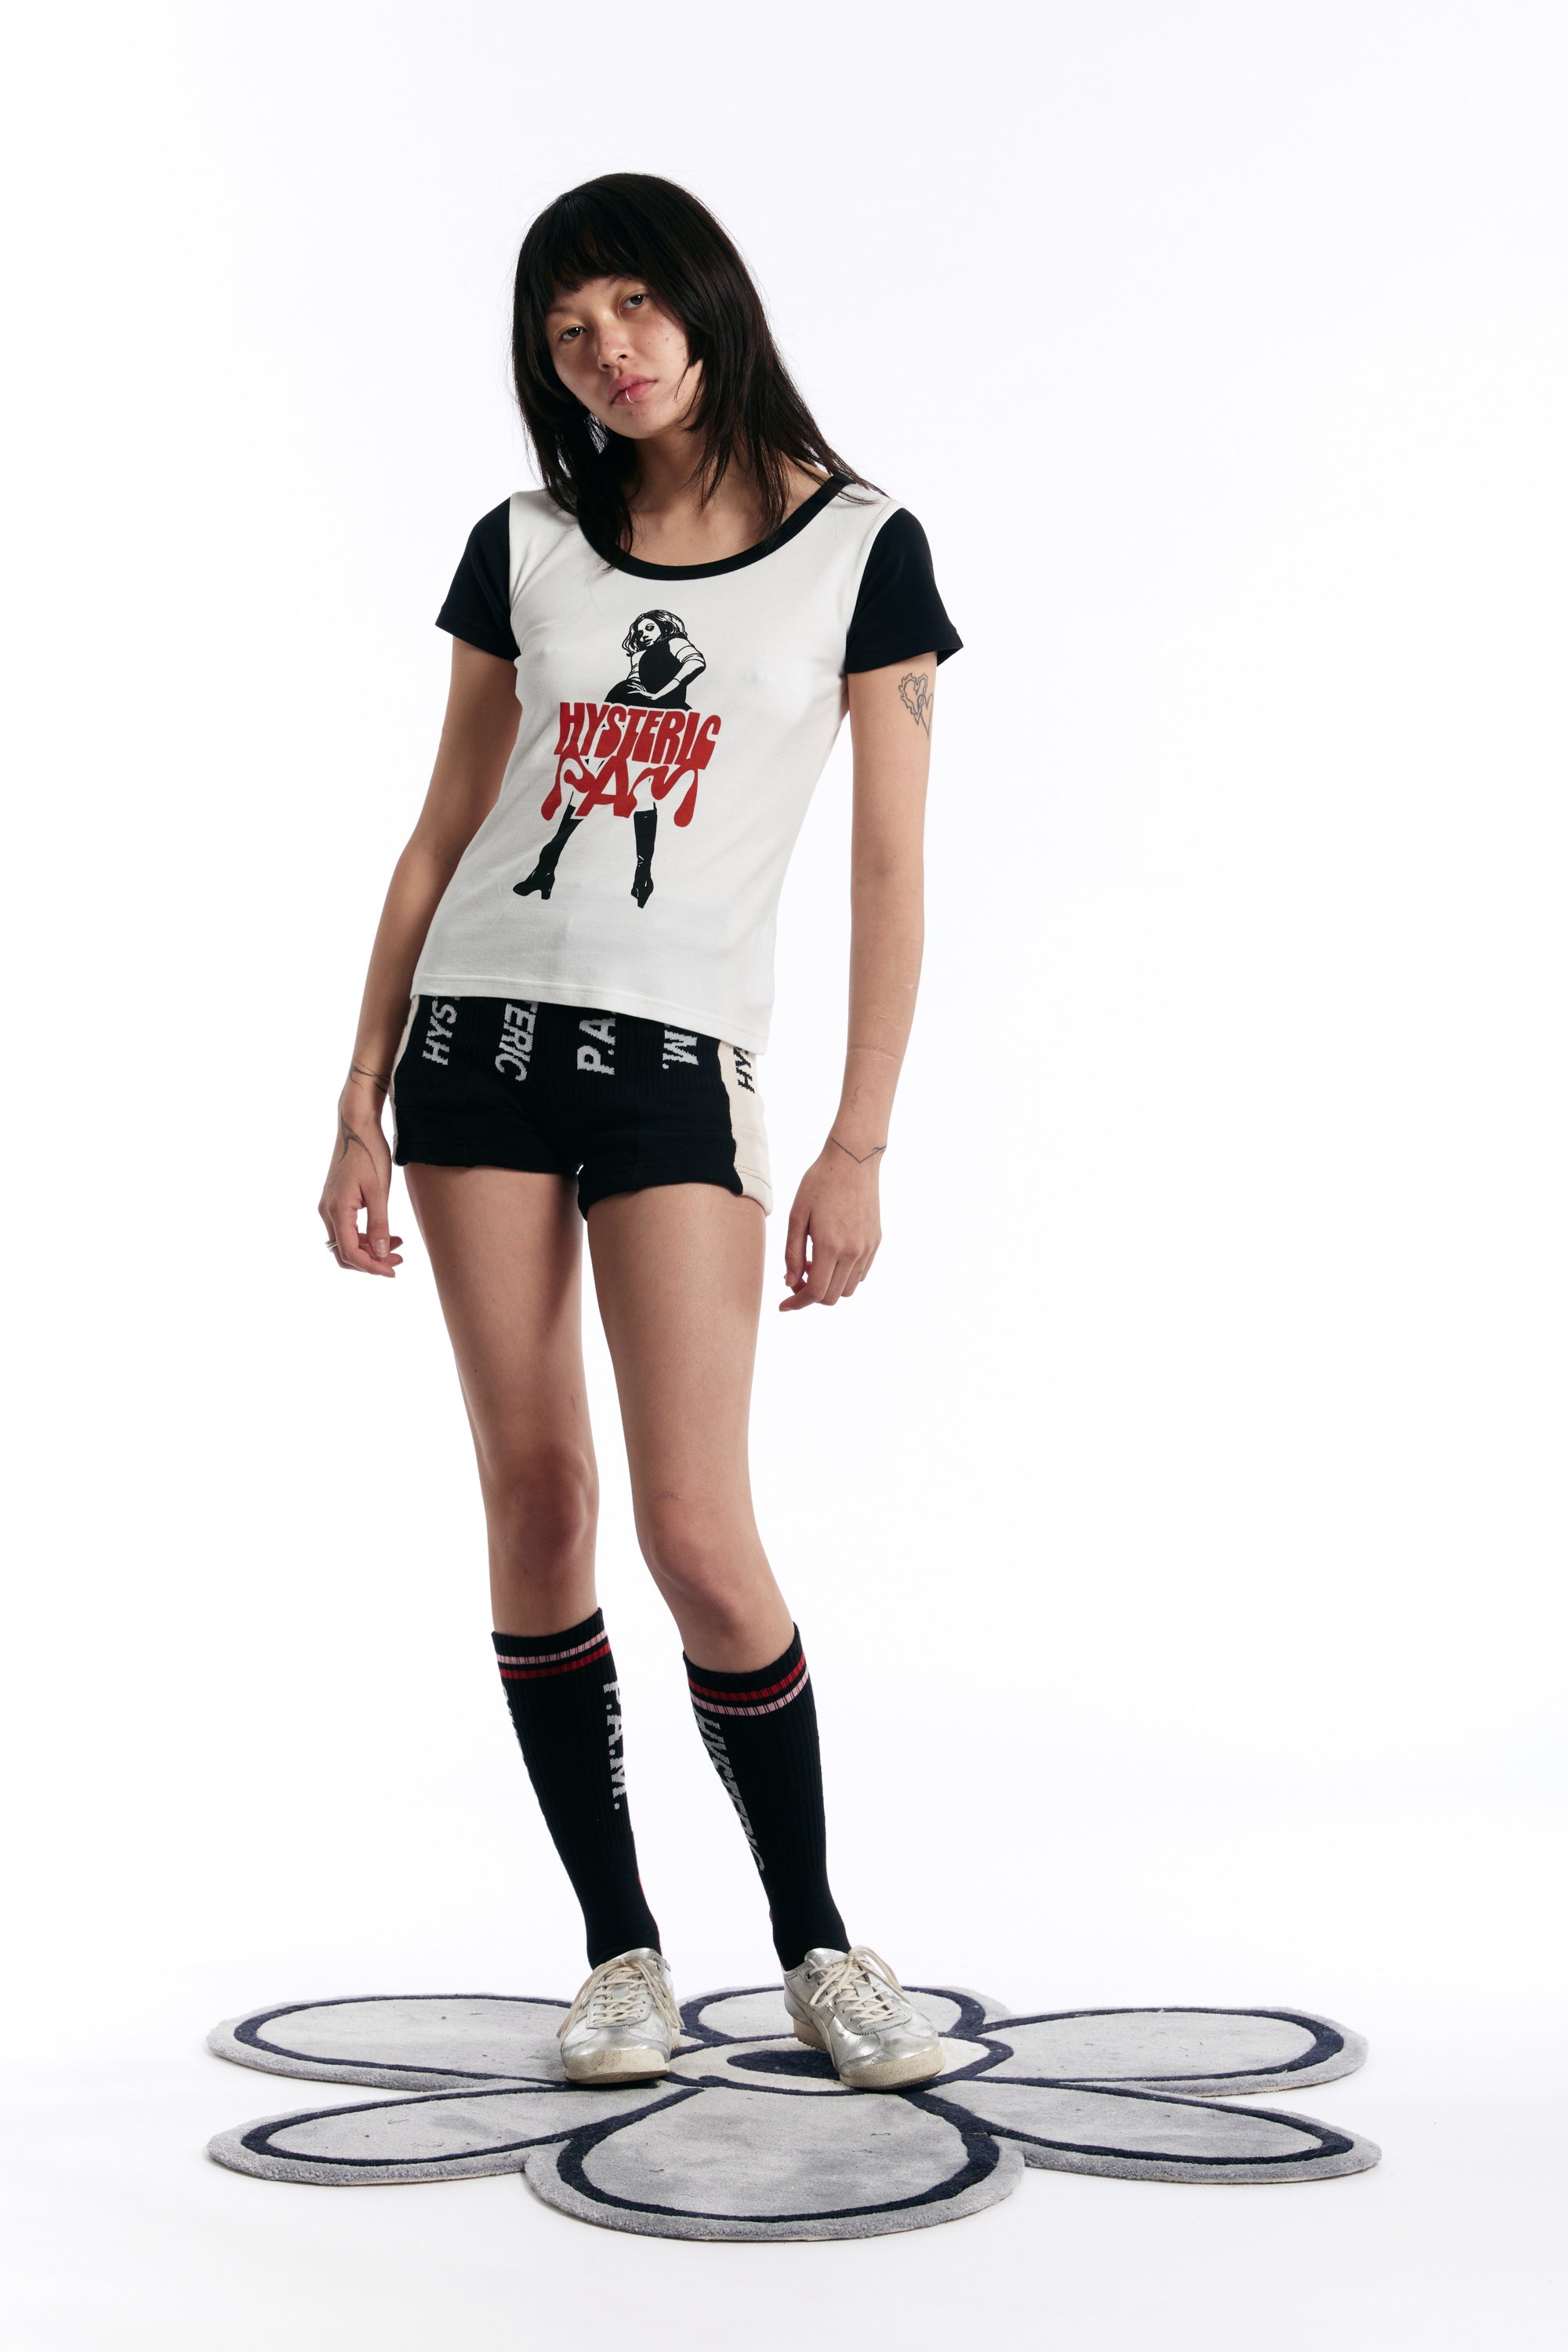 The PAM X HYSTERIC GLAMOUR - VIXEN GIRL T SHIRT  available online with global shipping, and in PAM Stores Melbourne and Sydney.